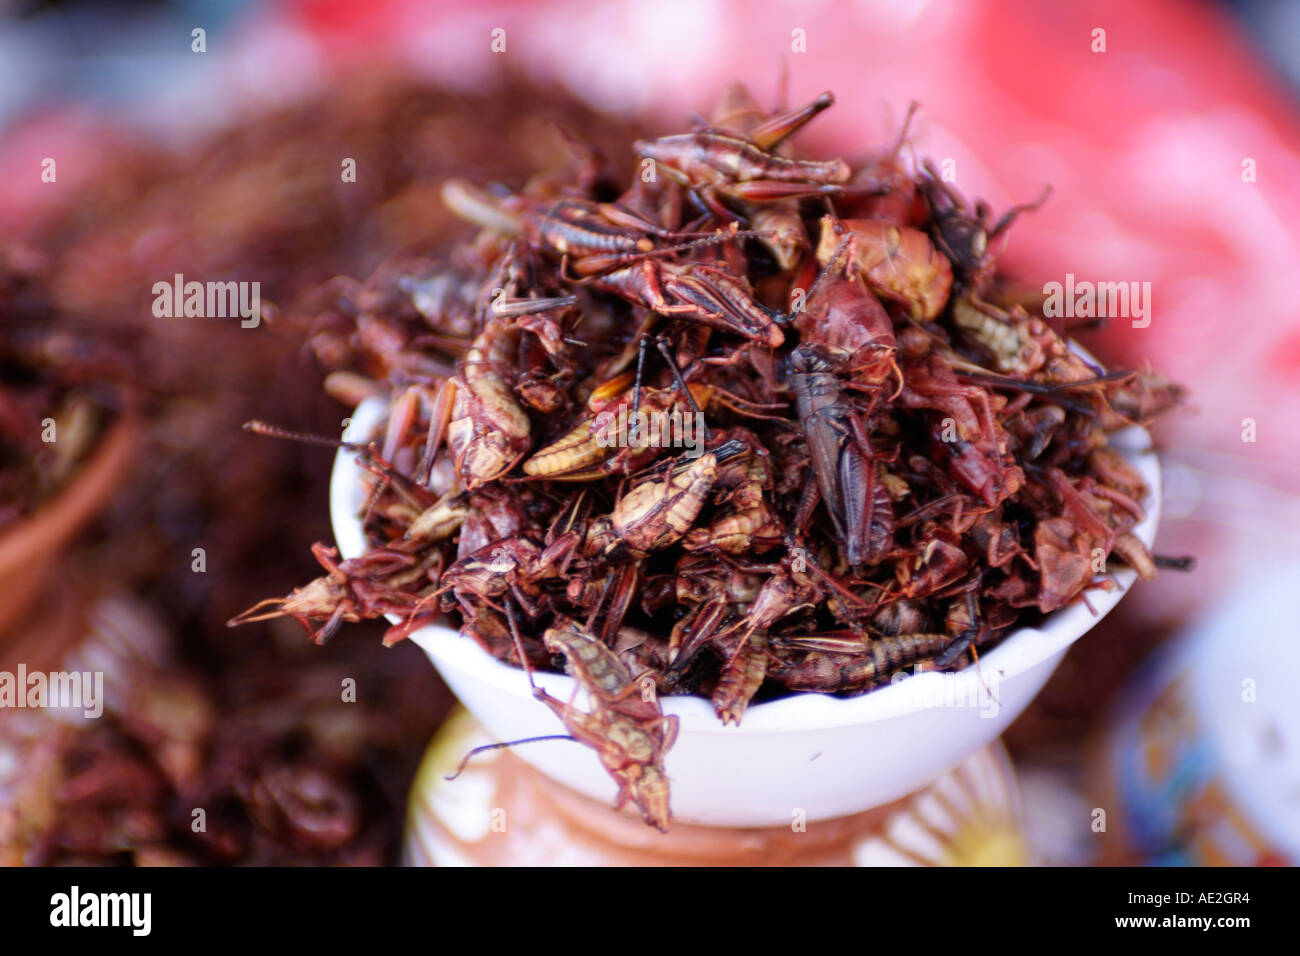 grasshoppers-fried-in-chilis-chapulines-